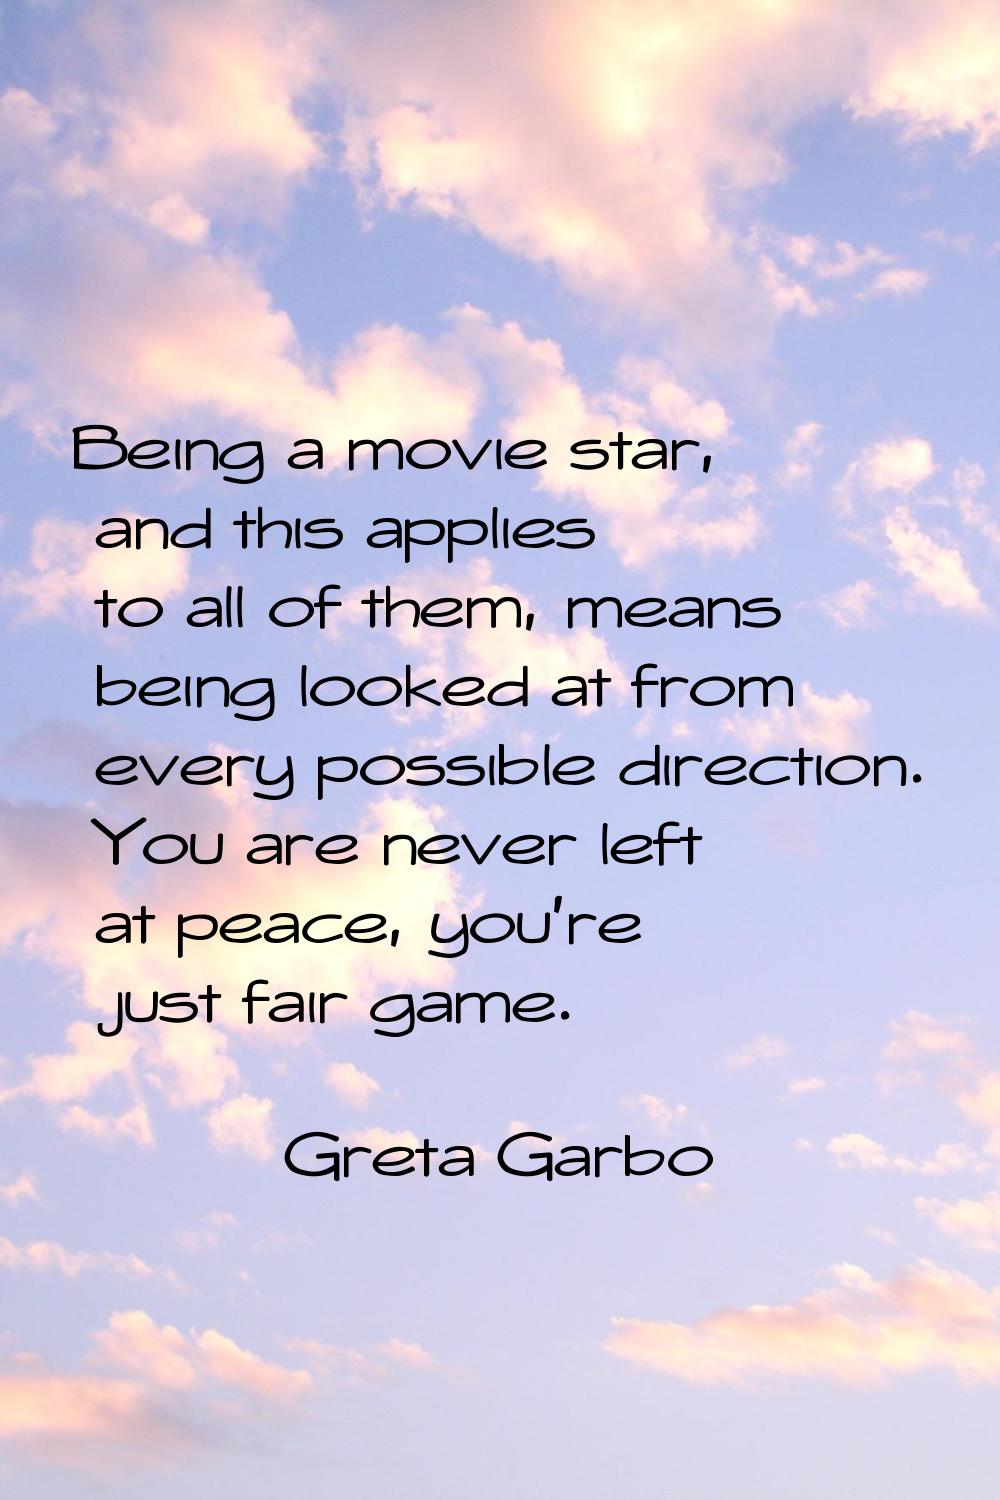 Being a movie star, and this applies to all of them, means being looked at from every possible dire